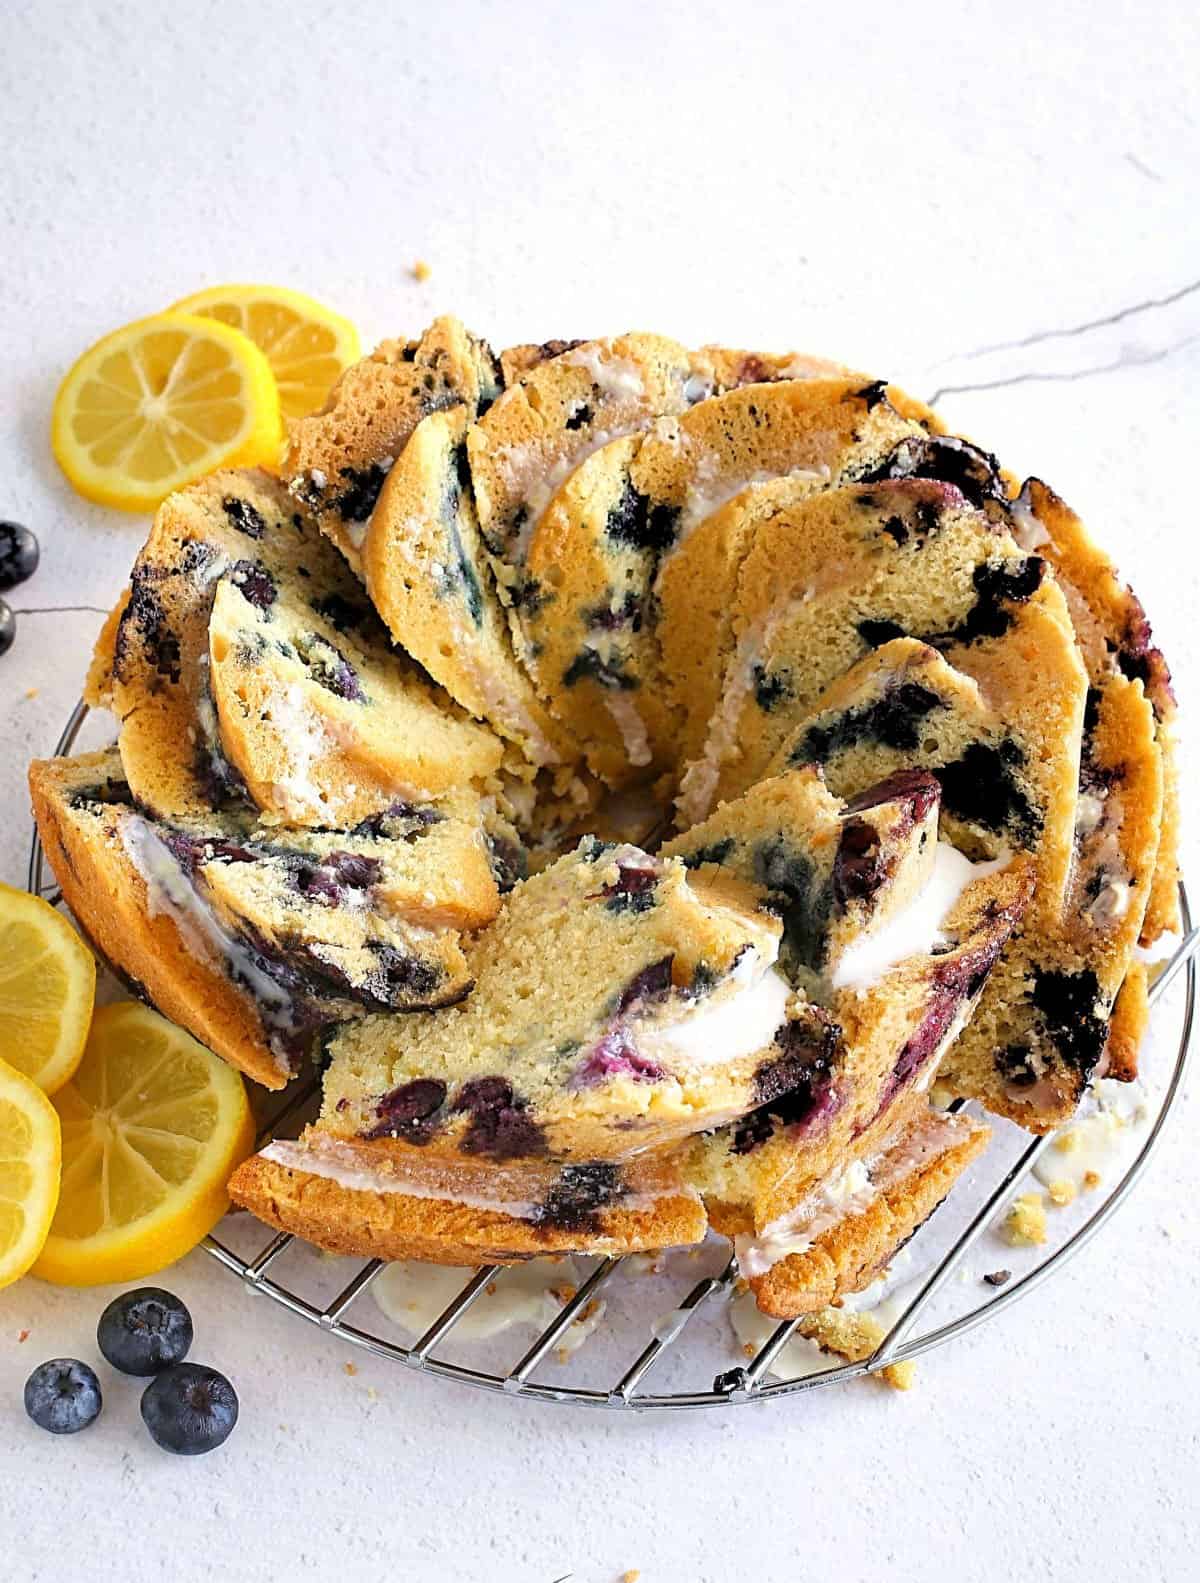 Bundt cake with blueberries sliced on a wire rack.